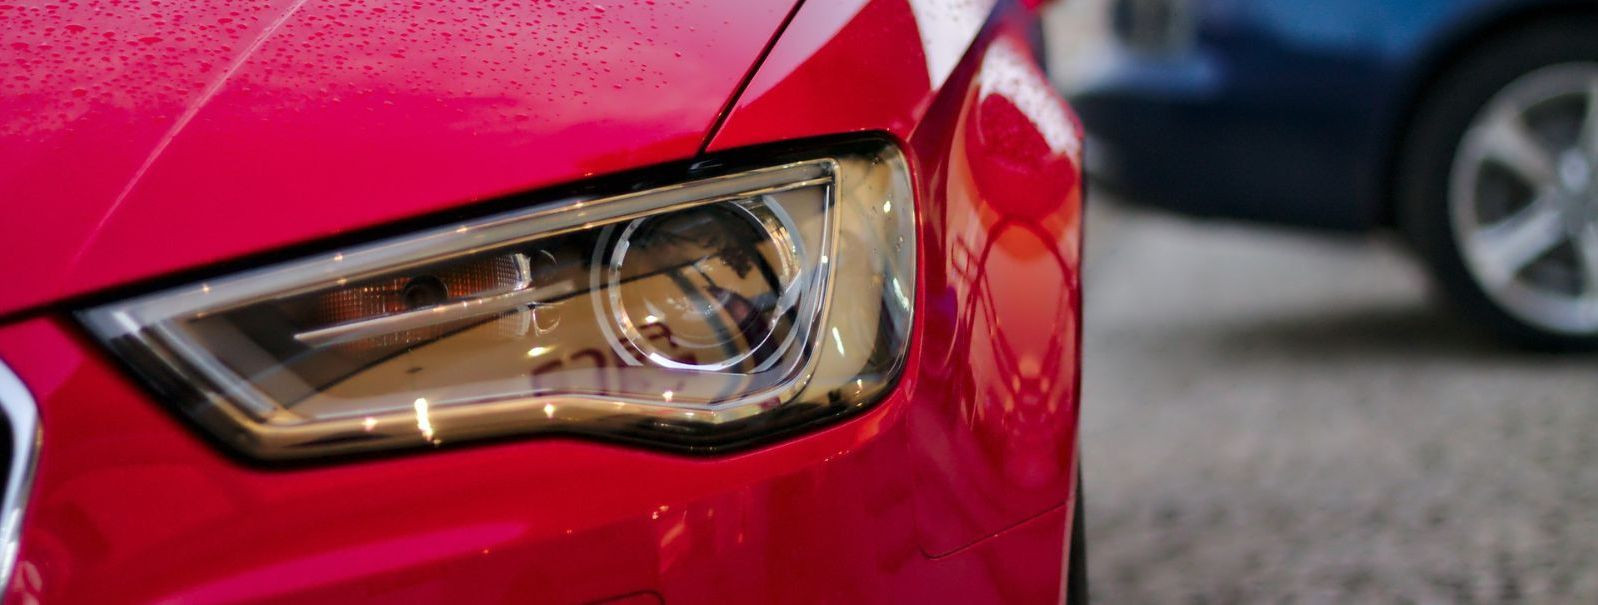 Vehicle lighting is a critical component of automotive safety and functionality. As technology evolves, so do the standards for what constitutes adequate lighti